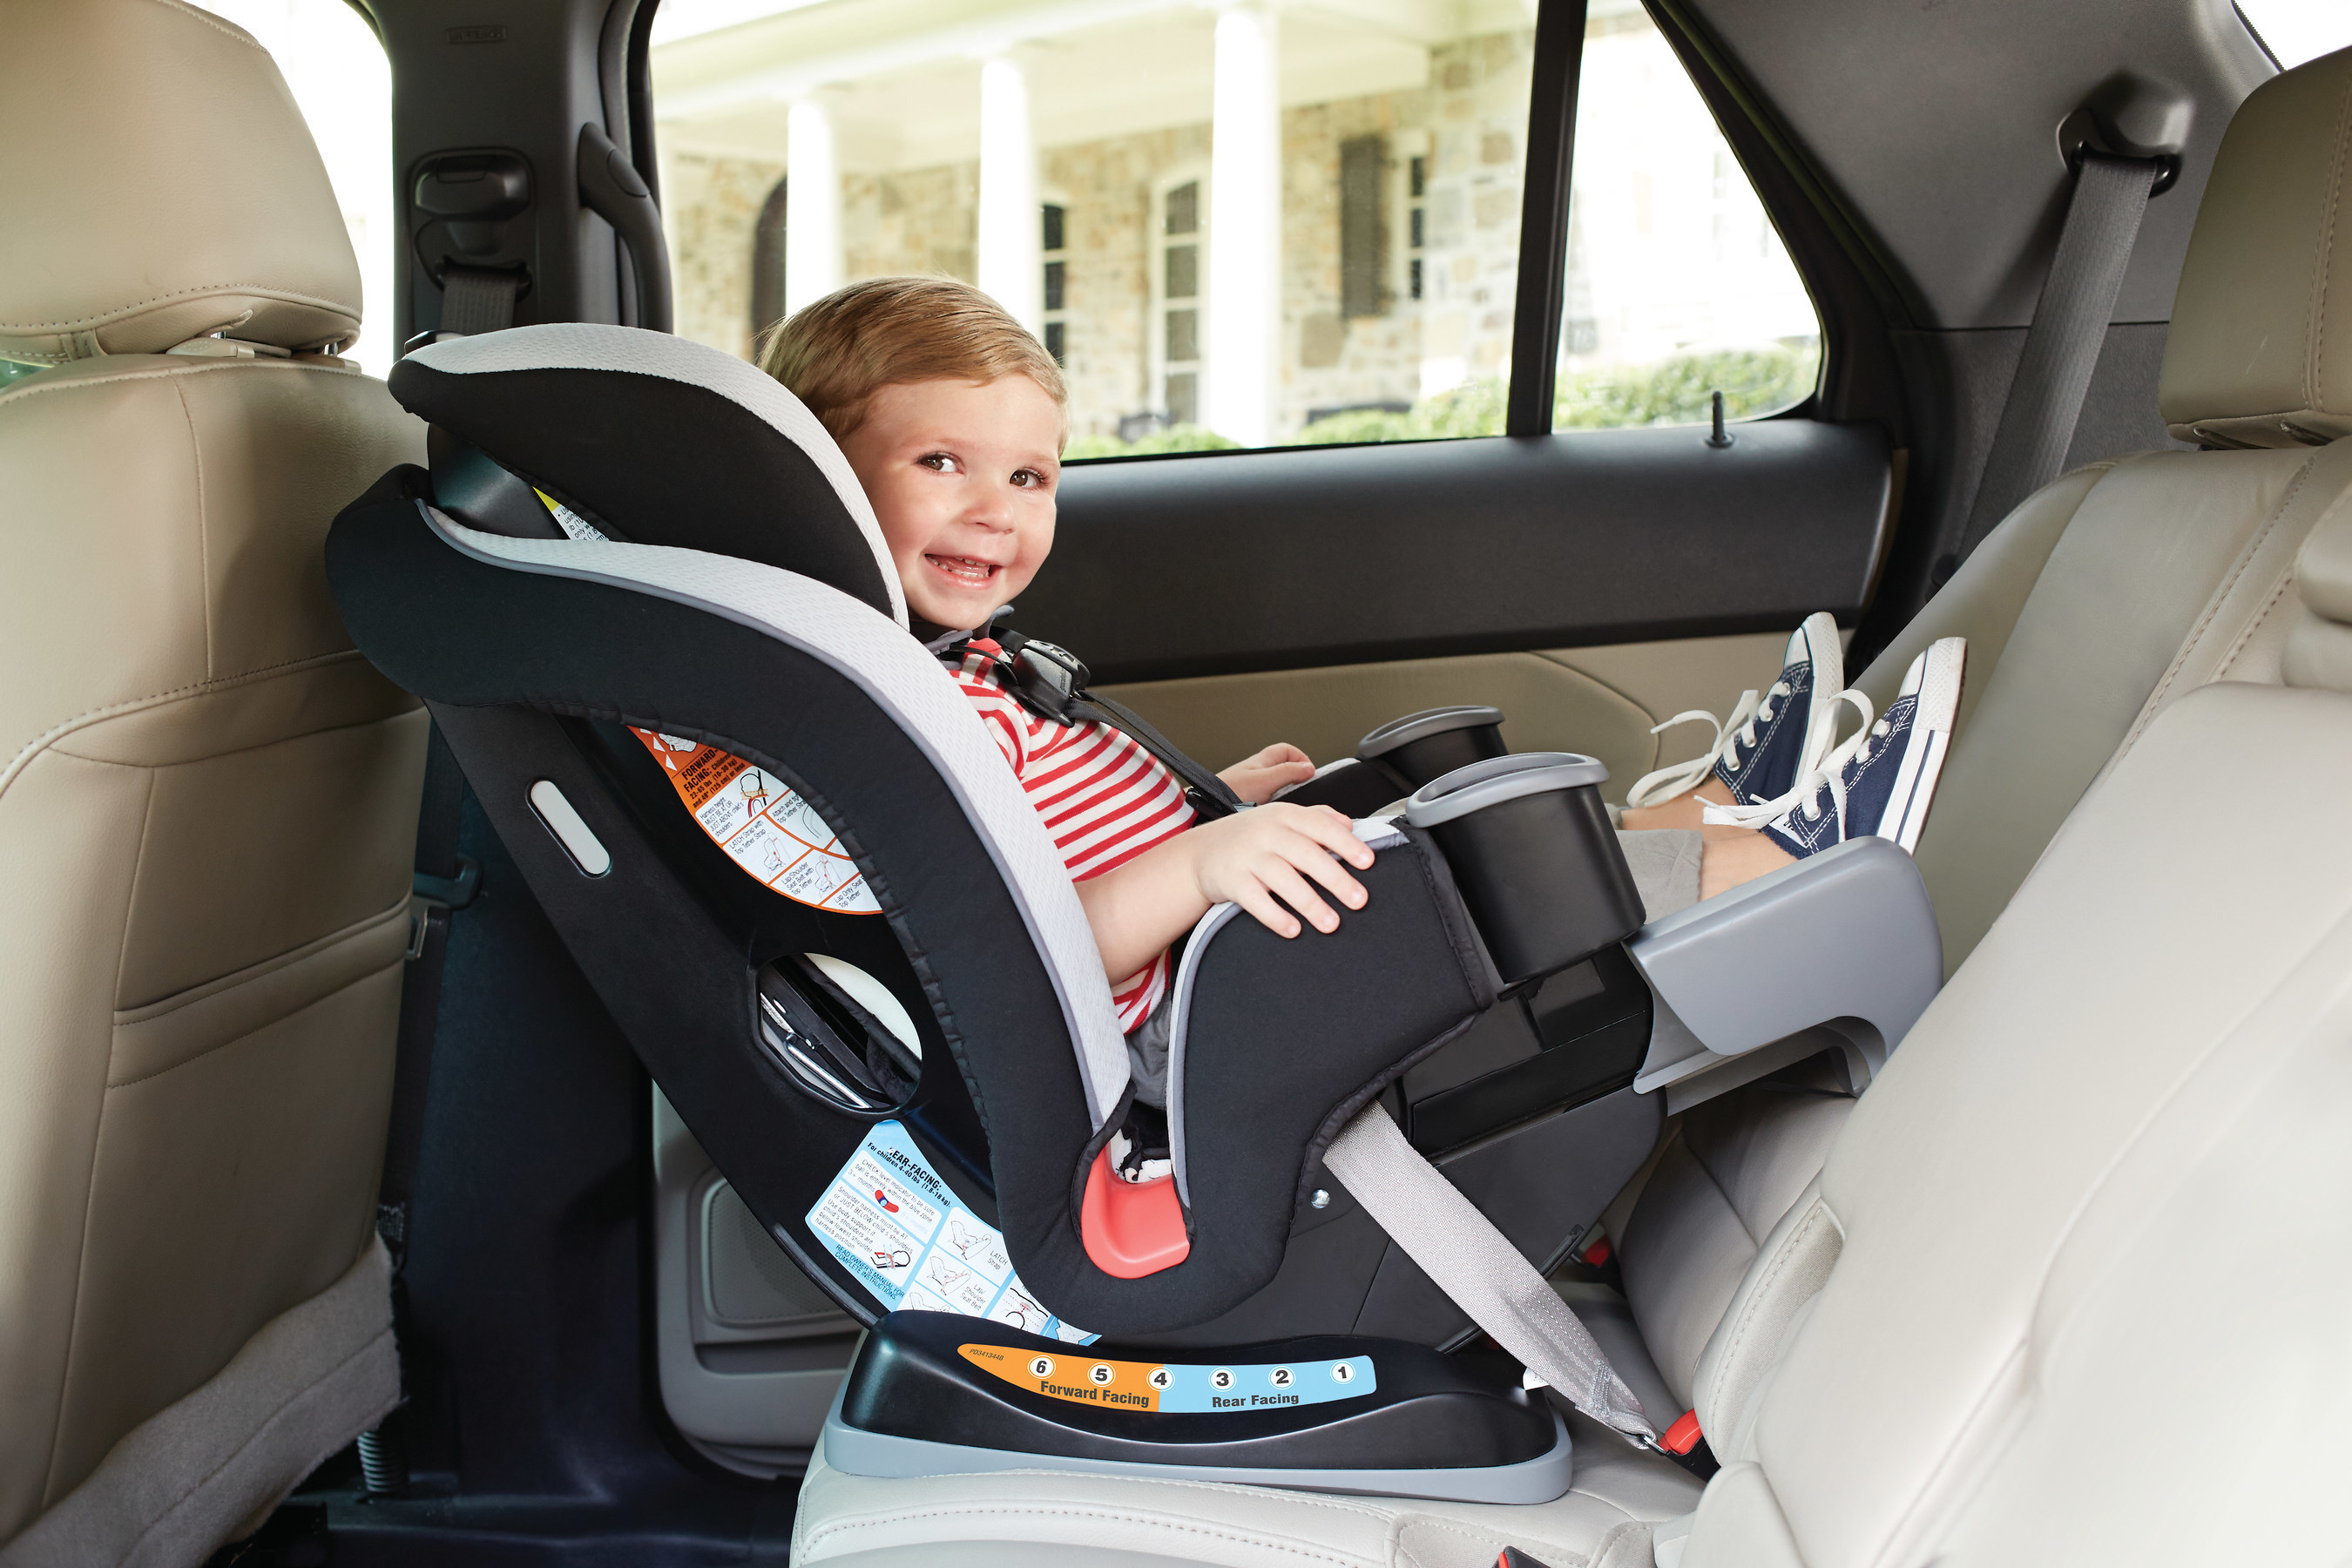 New Graco Extend2fit 3 In 1 Car Seat Maximizes Safety And Comfort By Providing Five Inches Of Extra Legroom For Little Ones,Silver Dime Melt Value